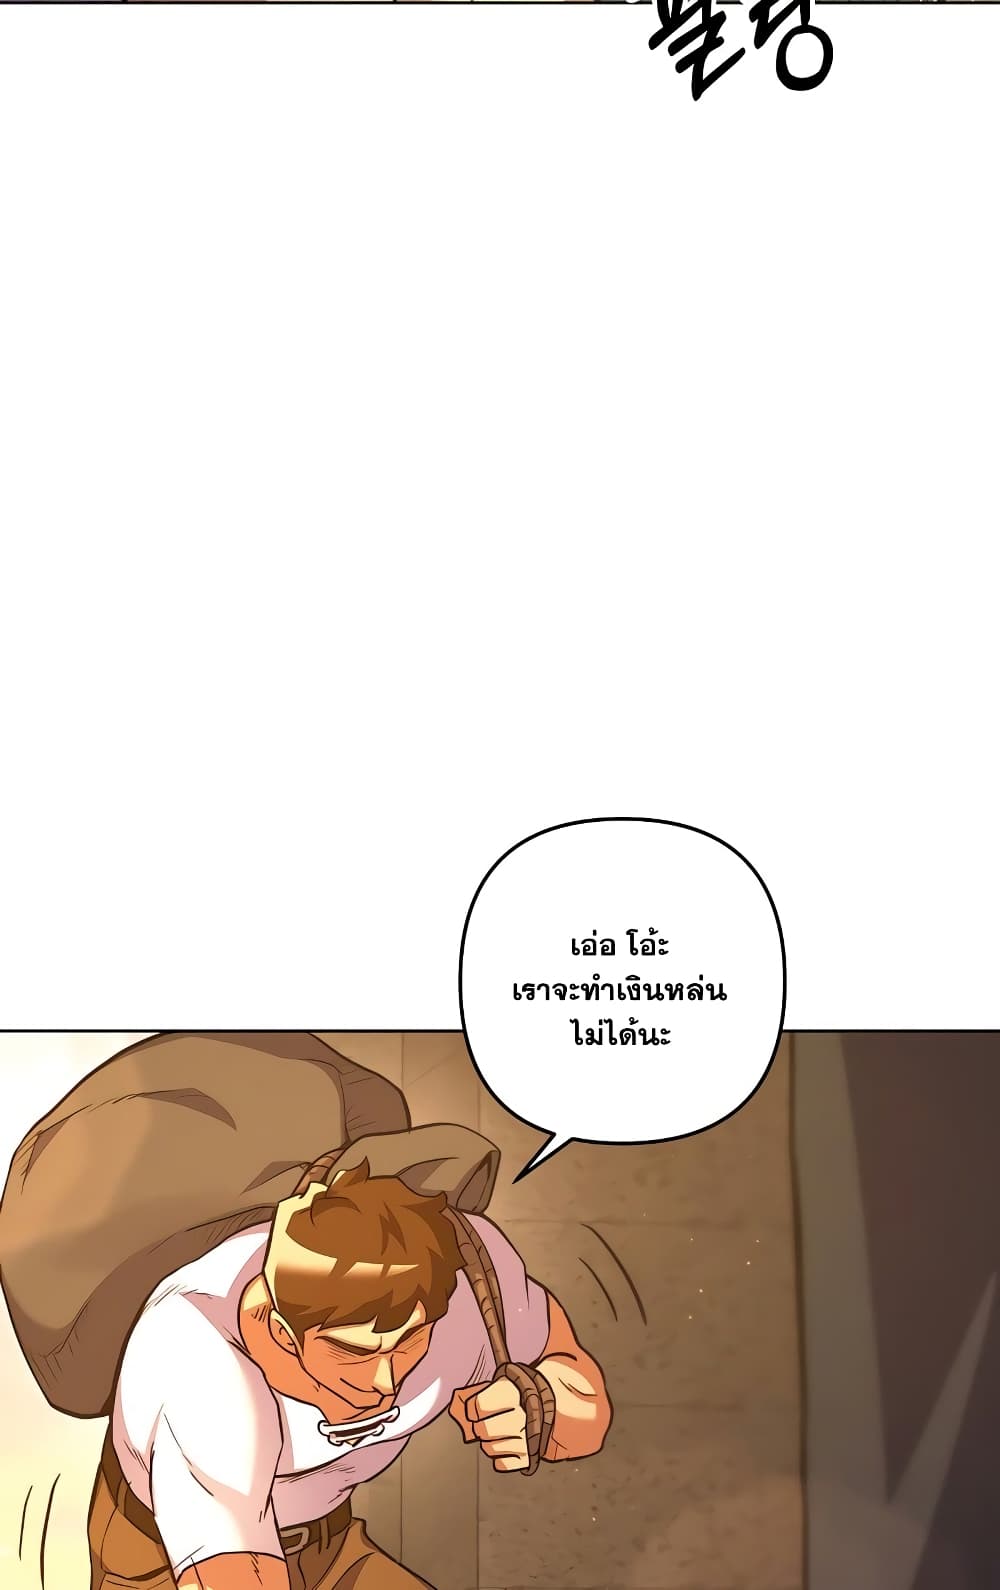 Surviving in an Action Manhwa 6 011